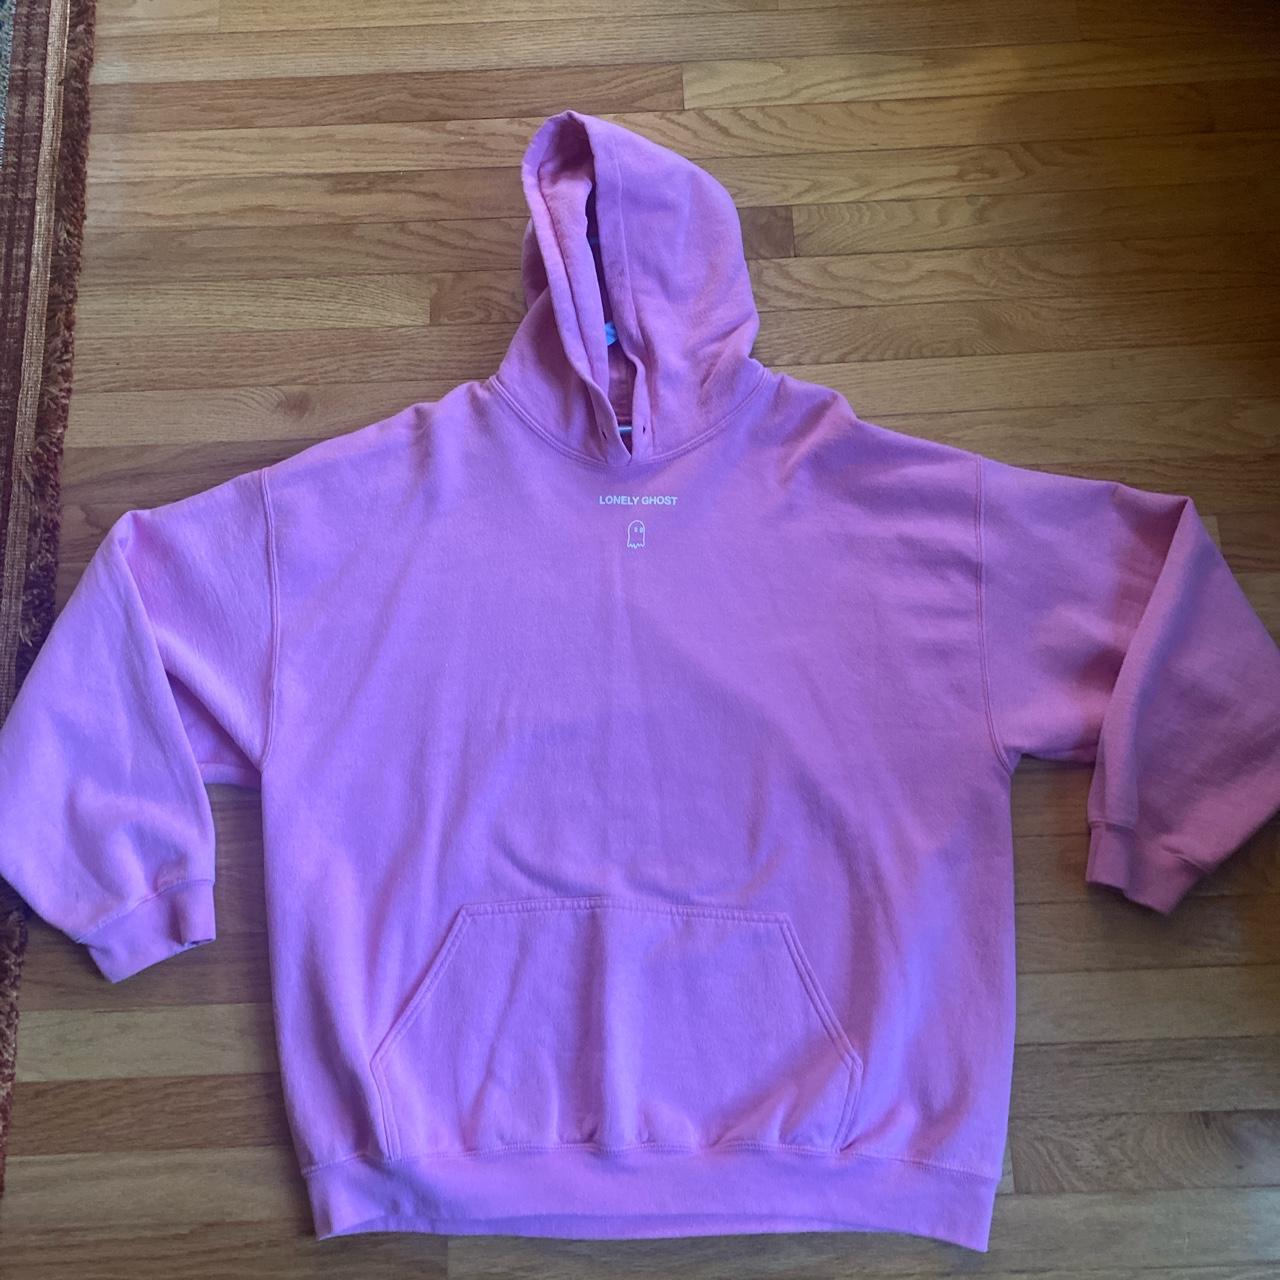 Pink Lonely ghost Text me when you get home... - Depop